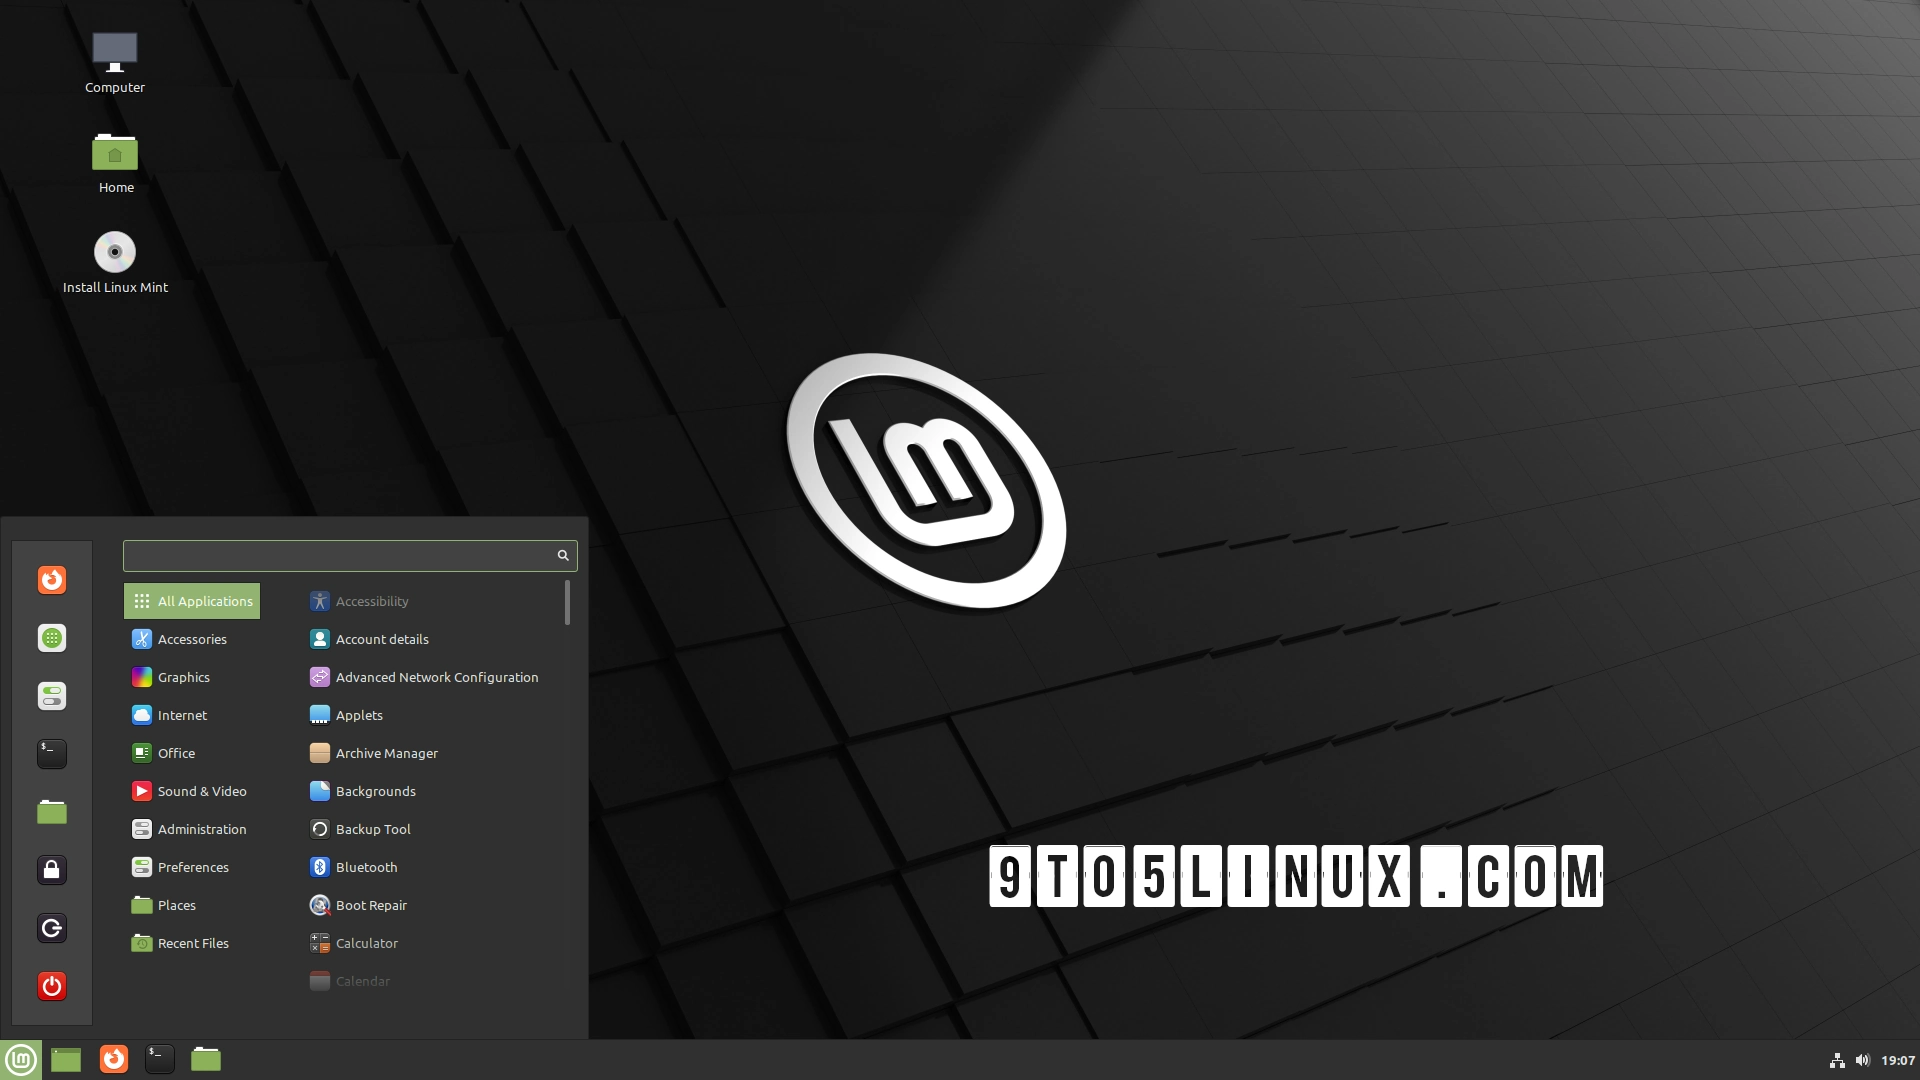 Linux Mint 21.2 with Cinnamon 5.8 Is Getting Support for Gestures